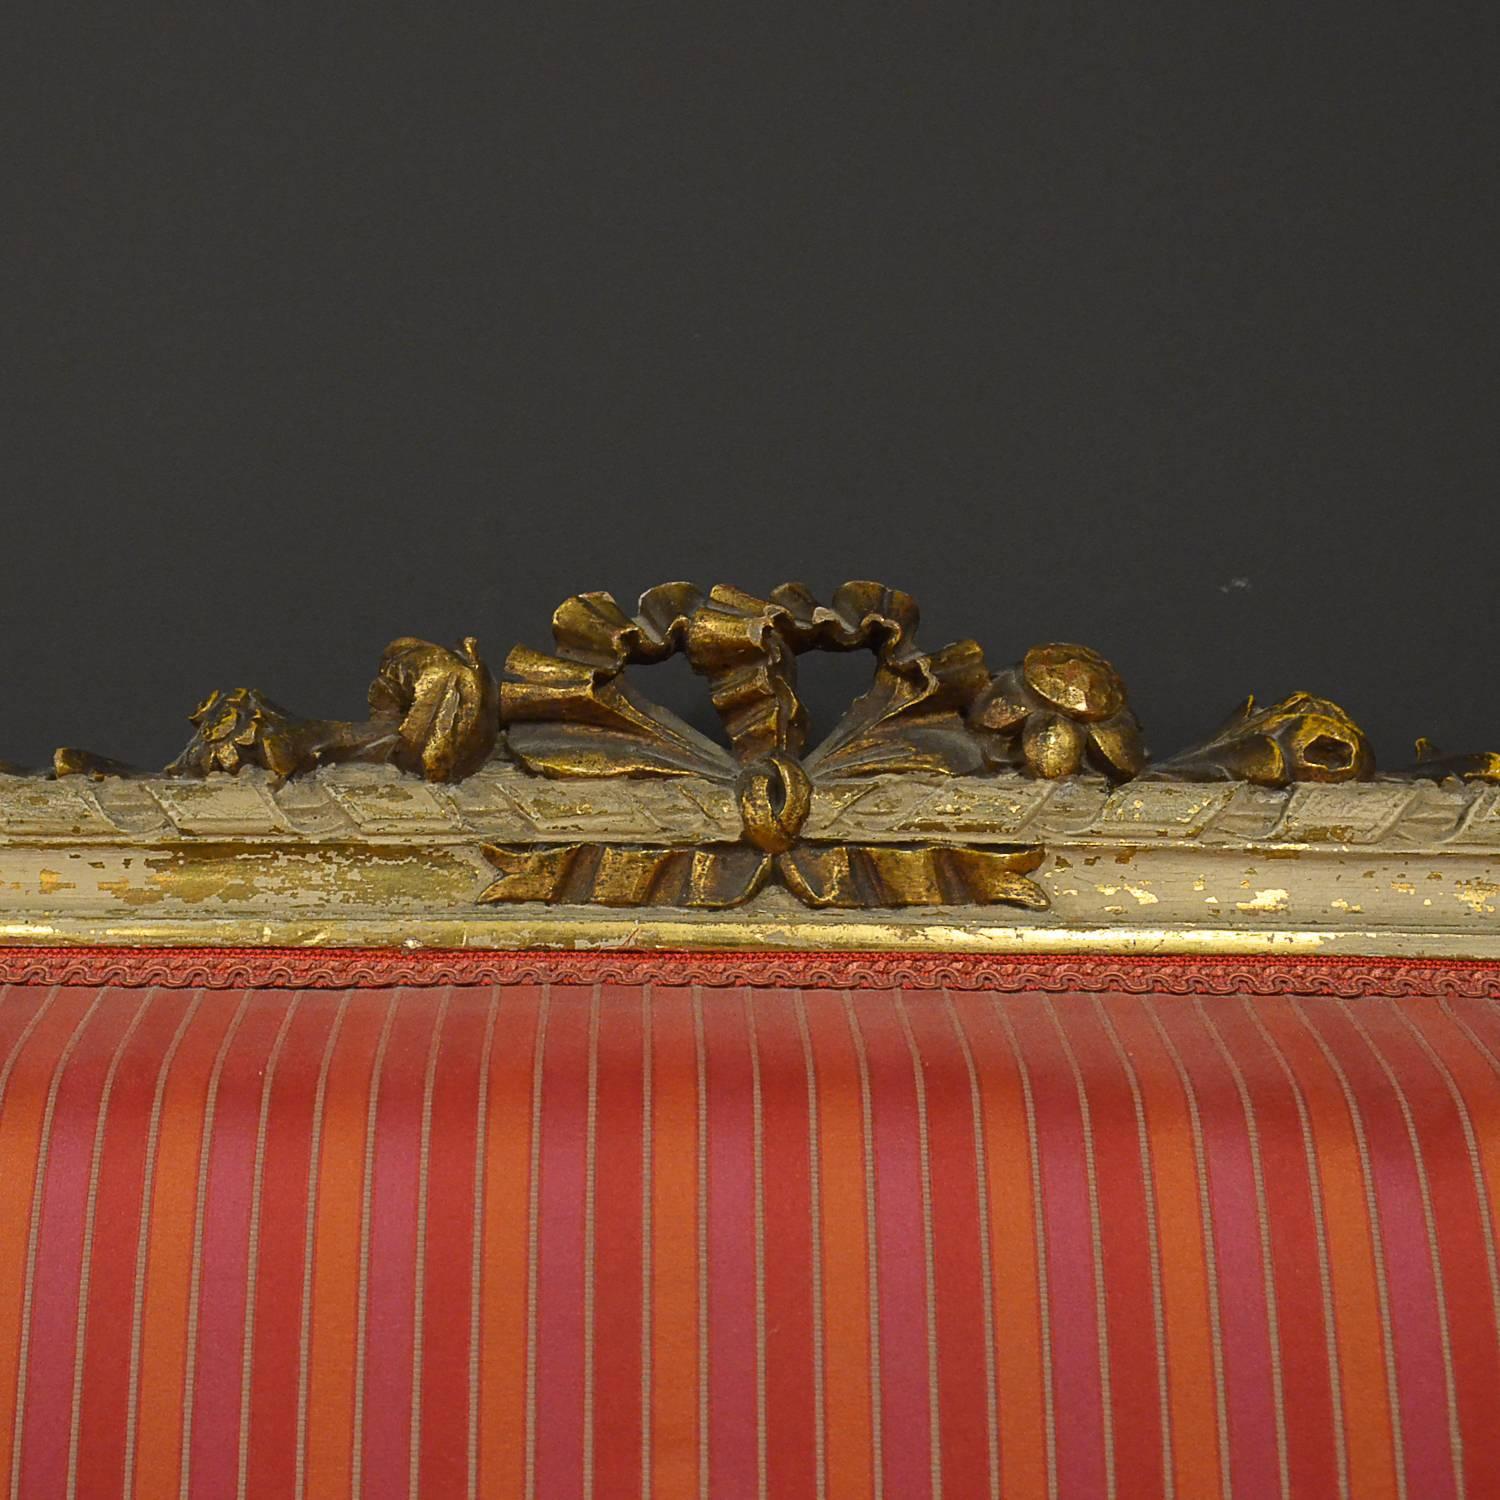 Restored Louis XVI style bench, original restored with red striped fabric.
Manufactured in France during the late 1800s.